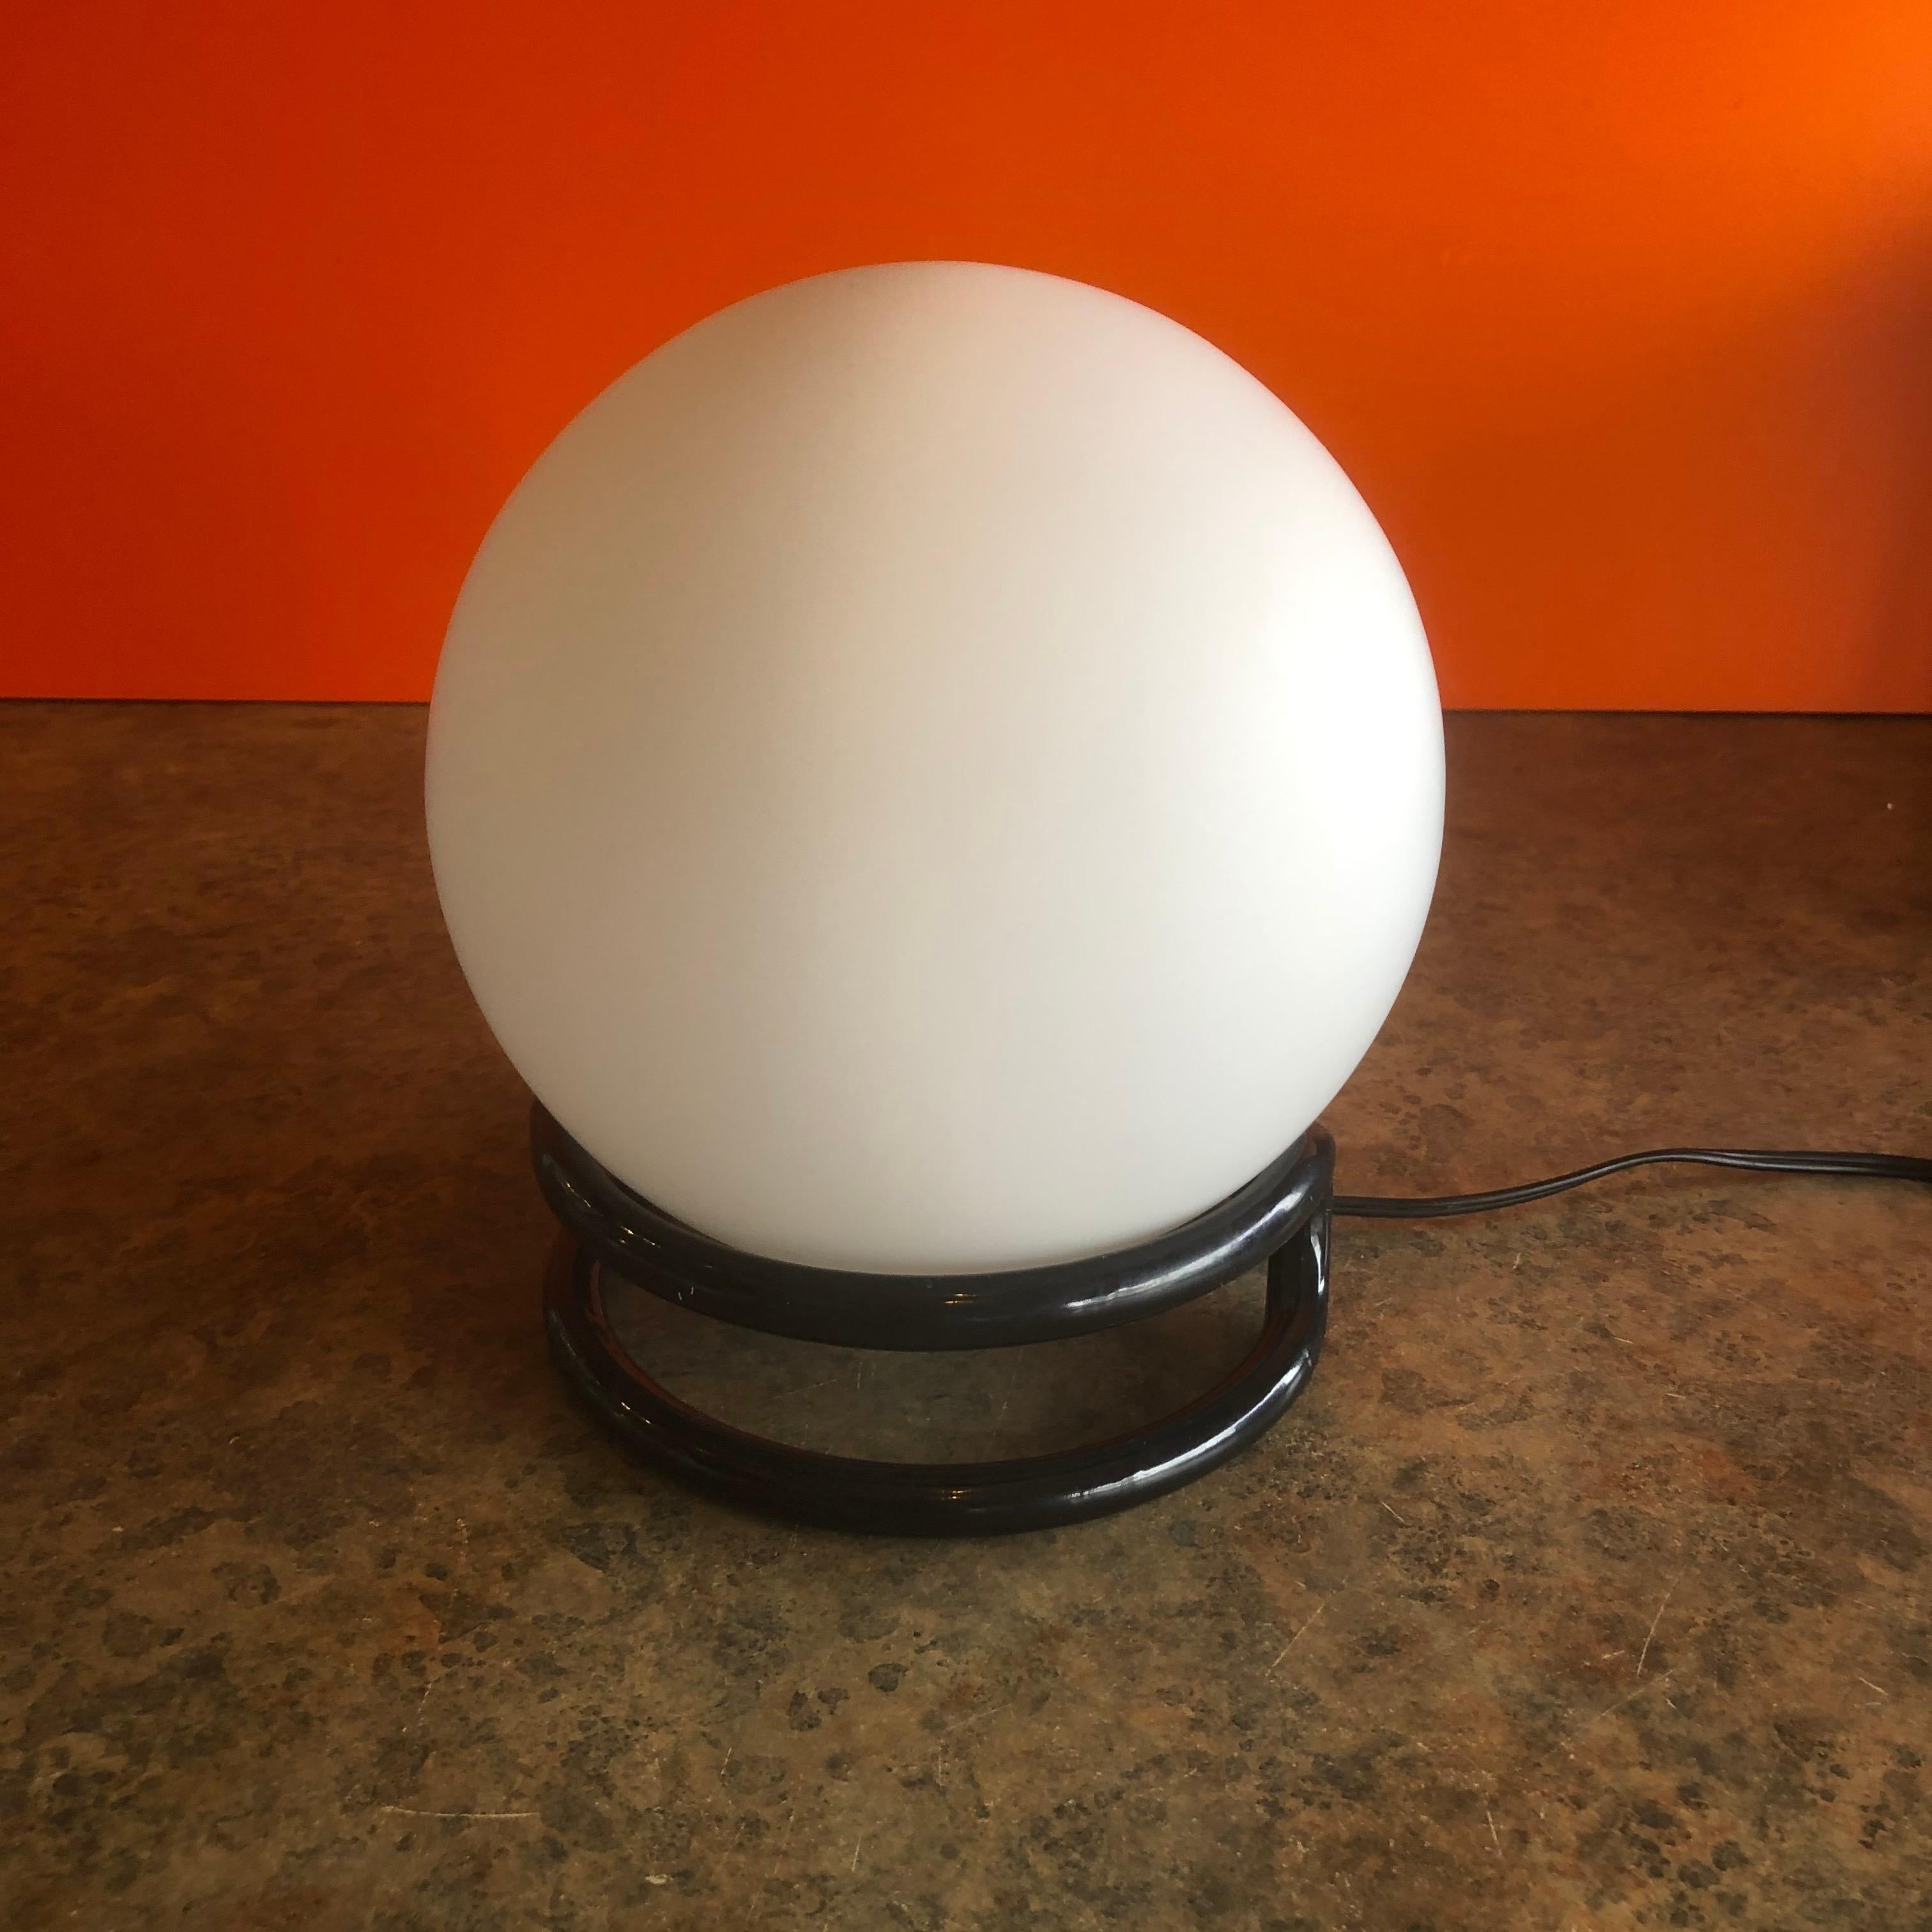 Vintage round white glass globe table lamp on base, circa 1970s. The piece is in very good condition and measures 7.5